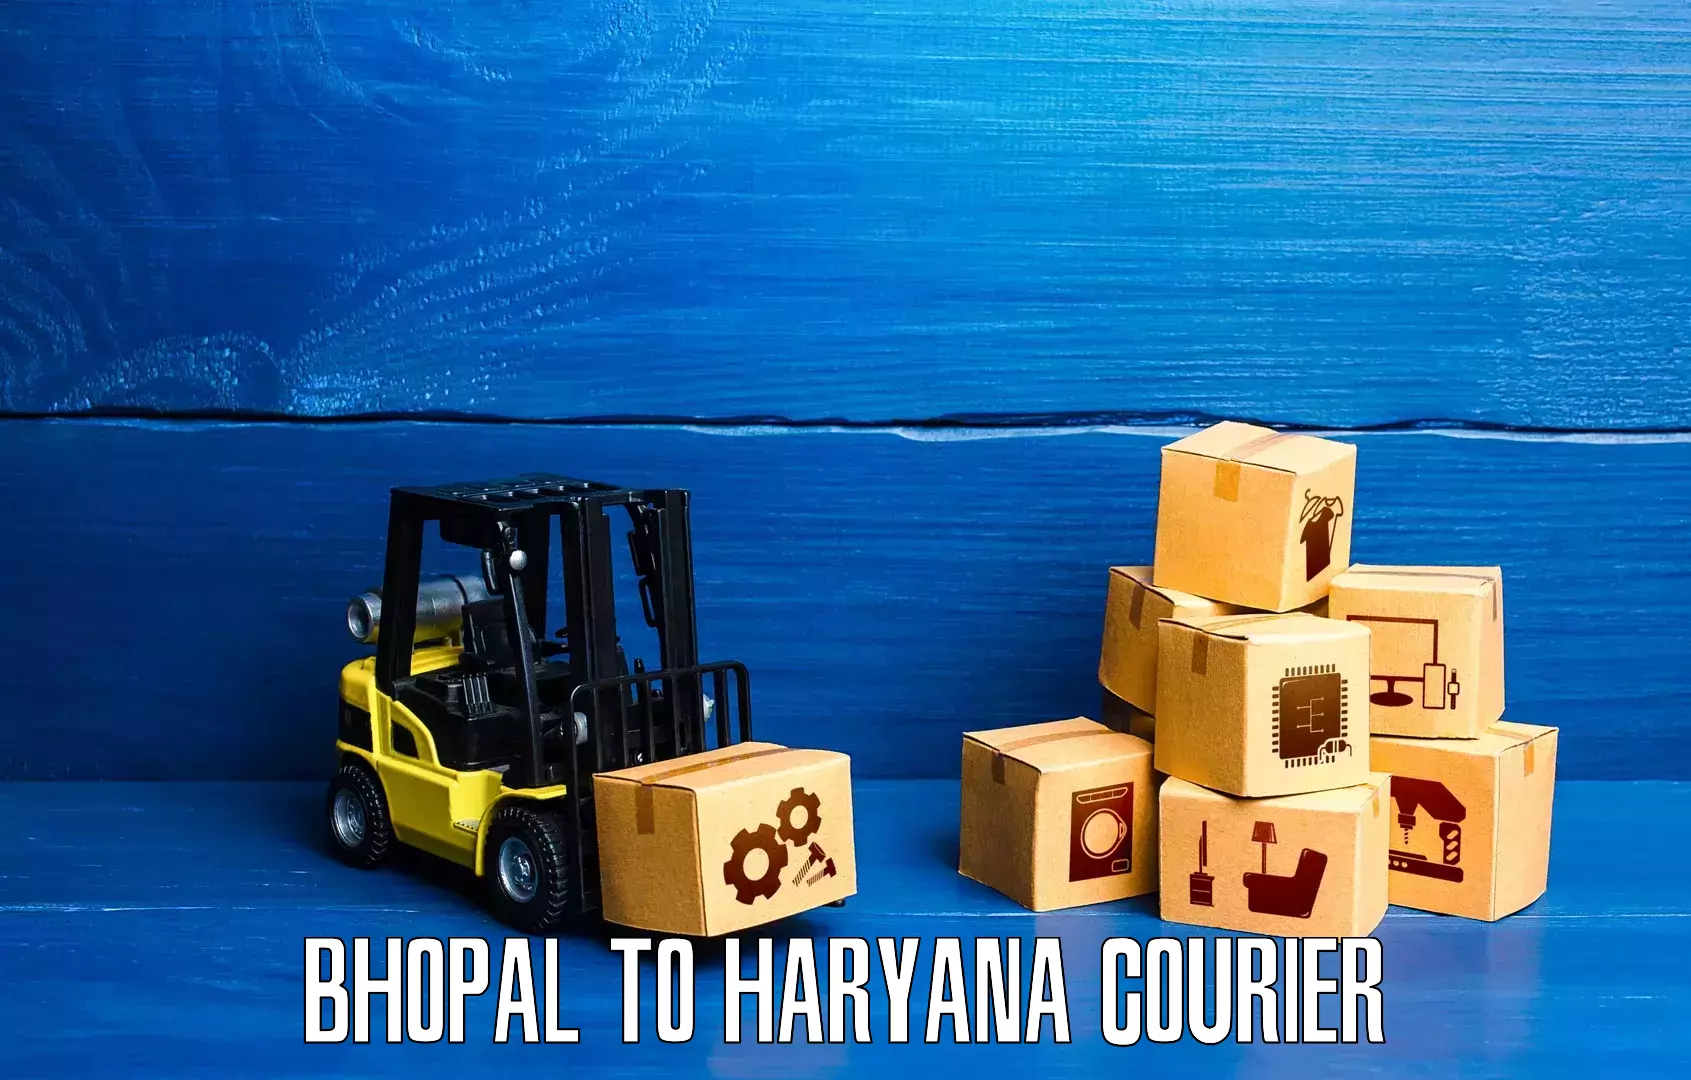 Efficient parcel tracking Bhopal to Charkhari